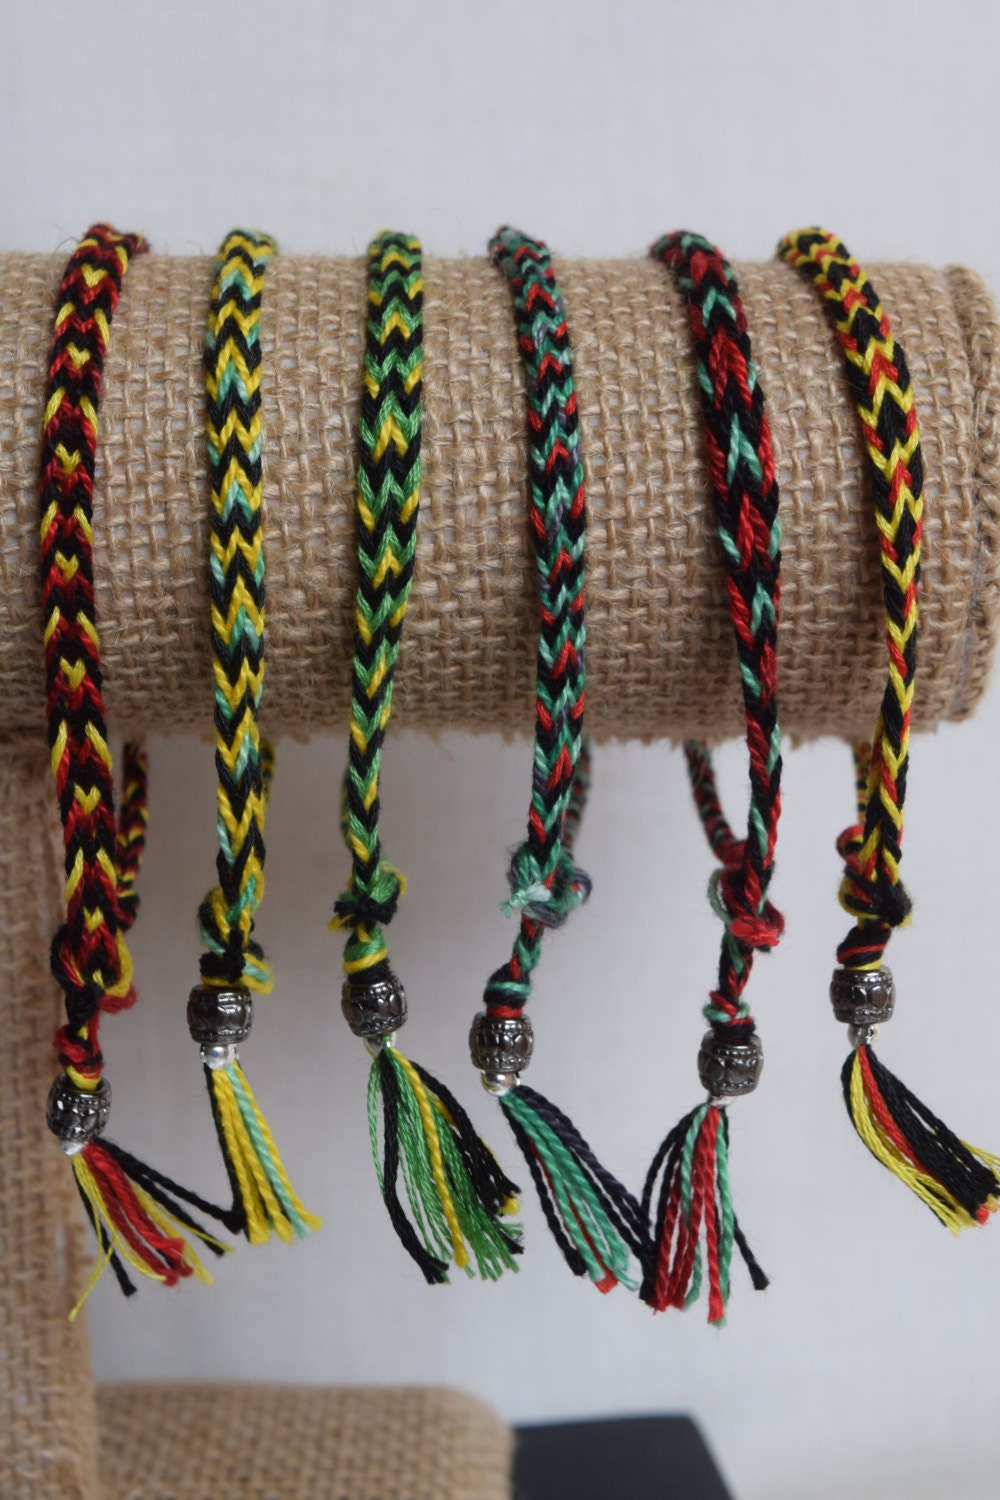 Multicolored Friendship Bracelets with Different Patterns Handmade of  Embroidery Floss and Thread Isolated on White Background Stock Image -  Image of accessory, braided: 171539067